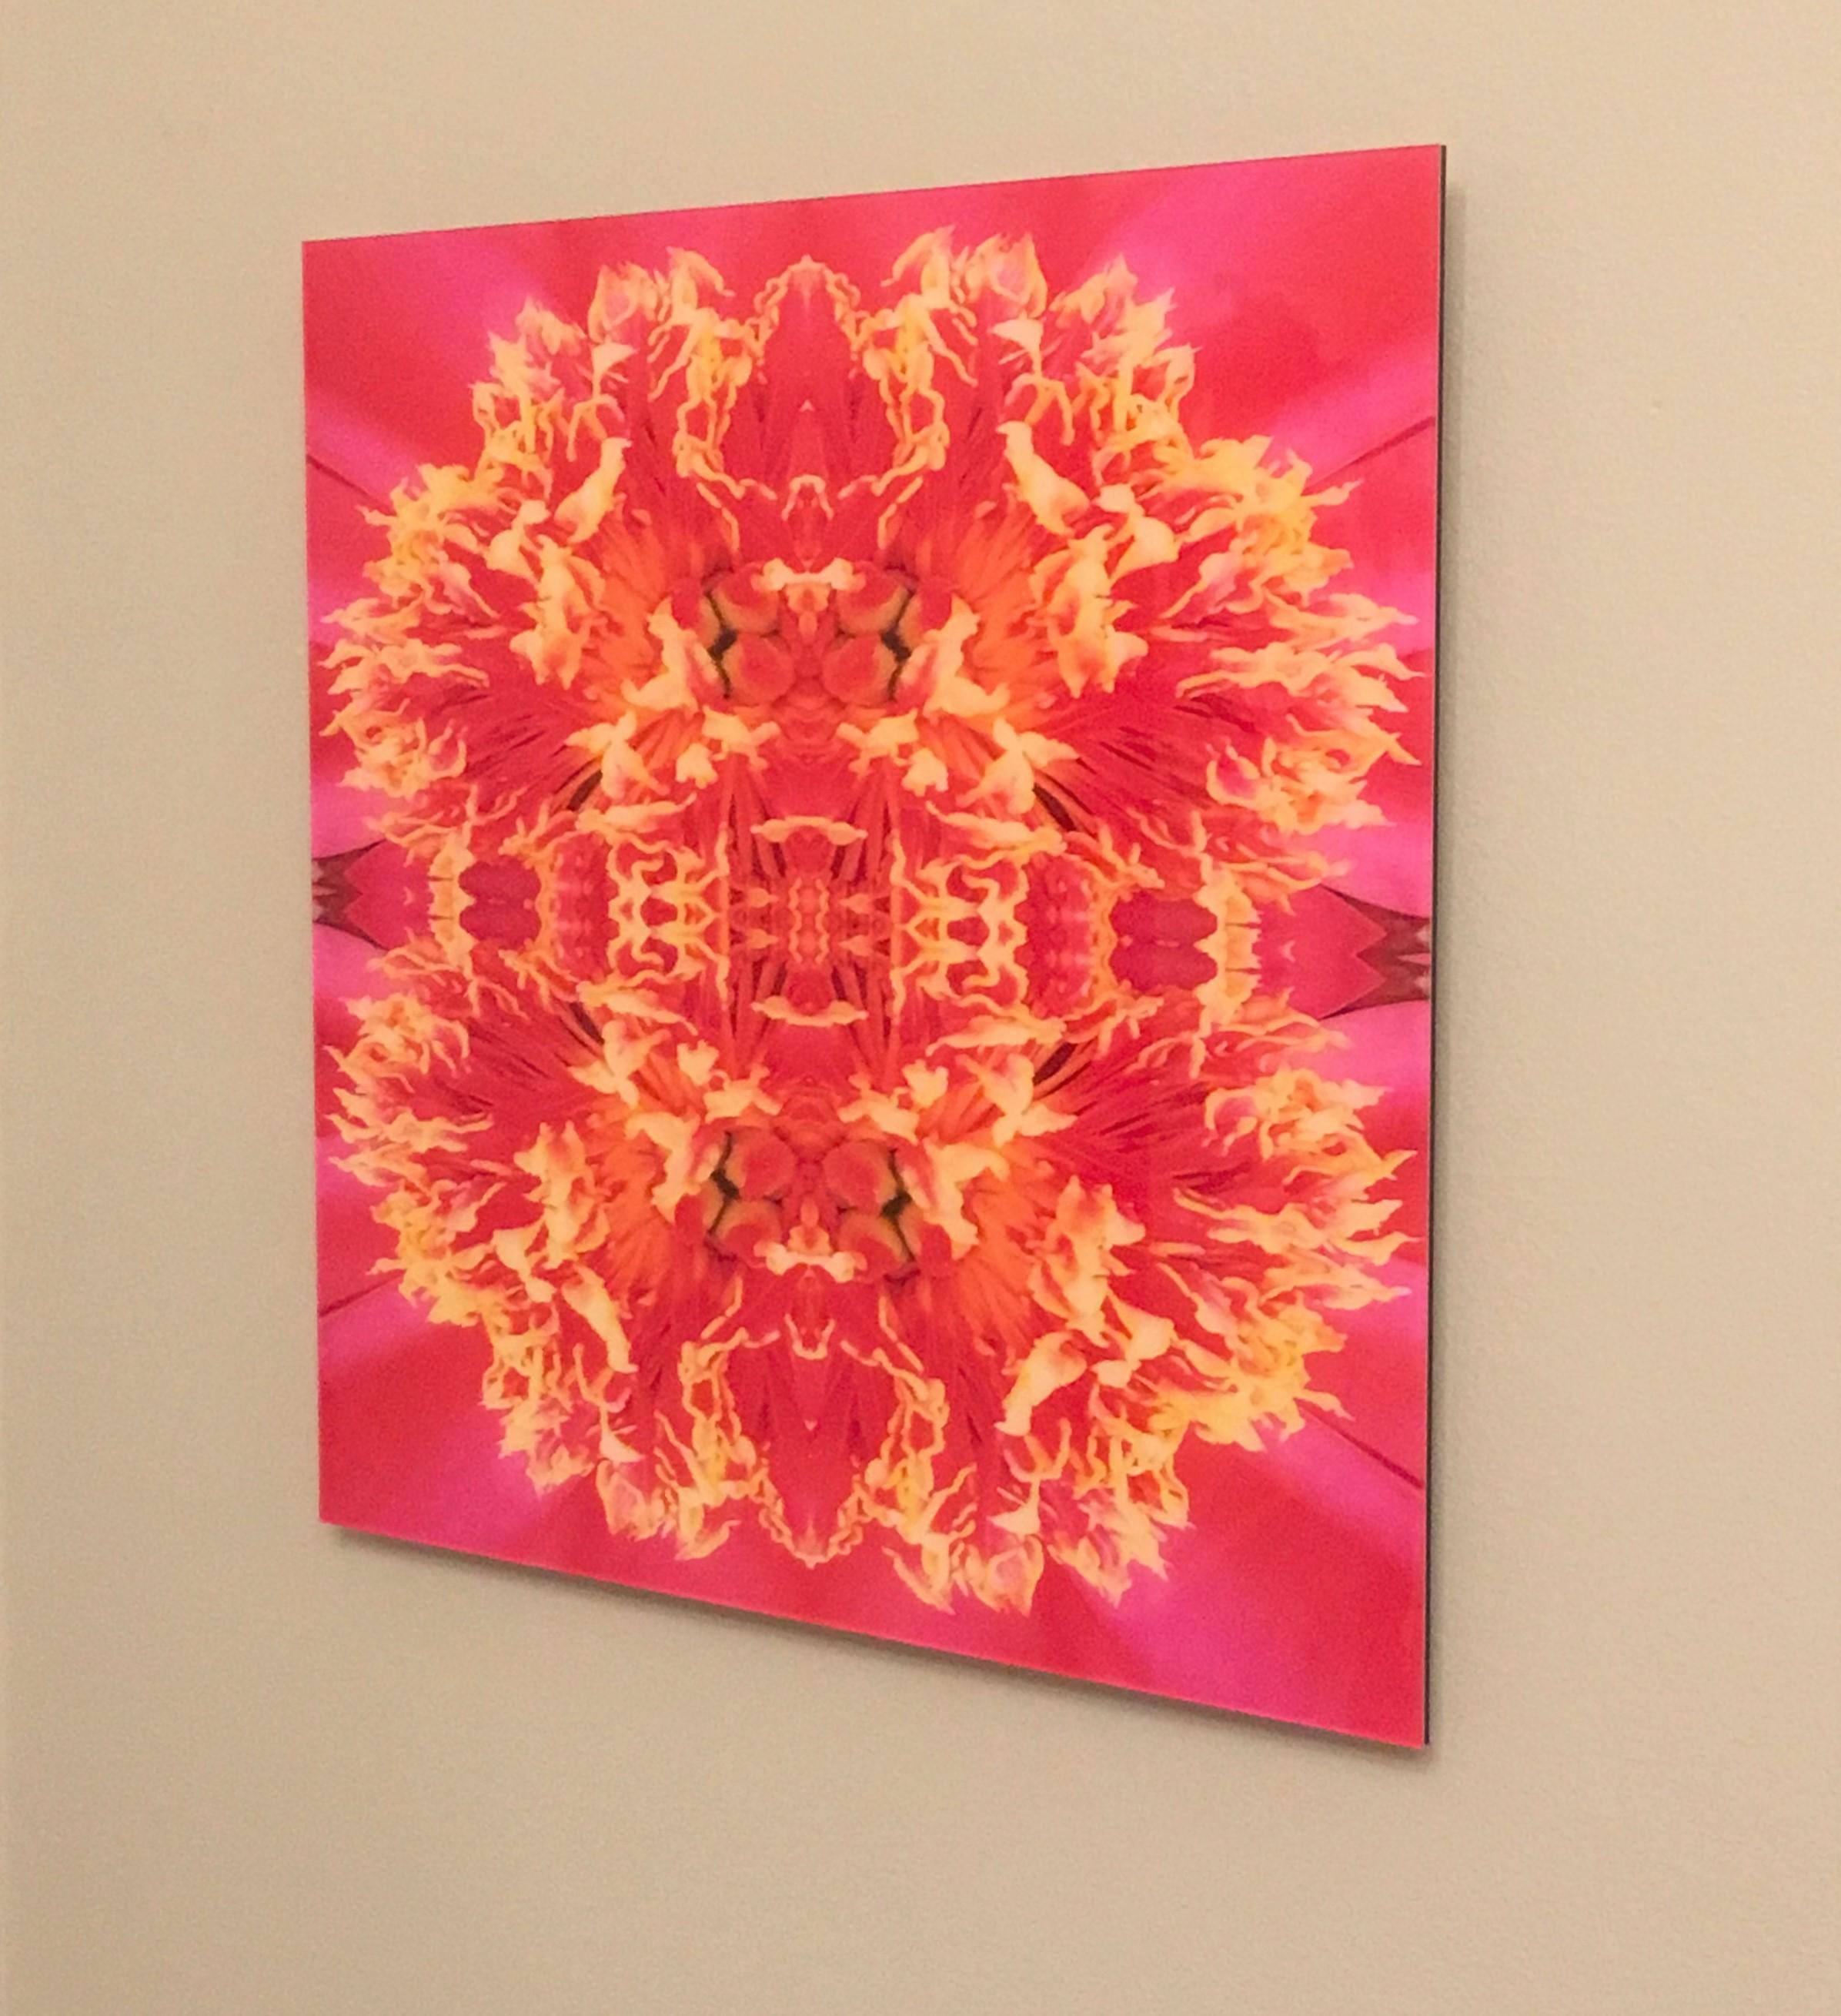 Rebecca Swanson, Frazel Dazel I, Limited Edition Photograph, 15x15, plexifacemount frame.  This stunning image is filled fuschia and a vibrant yellow colors.  This is an edition of 15.  Also available in 30x30.

Rebecca Swanson’s work is inspired